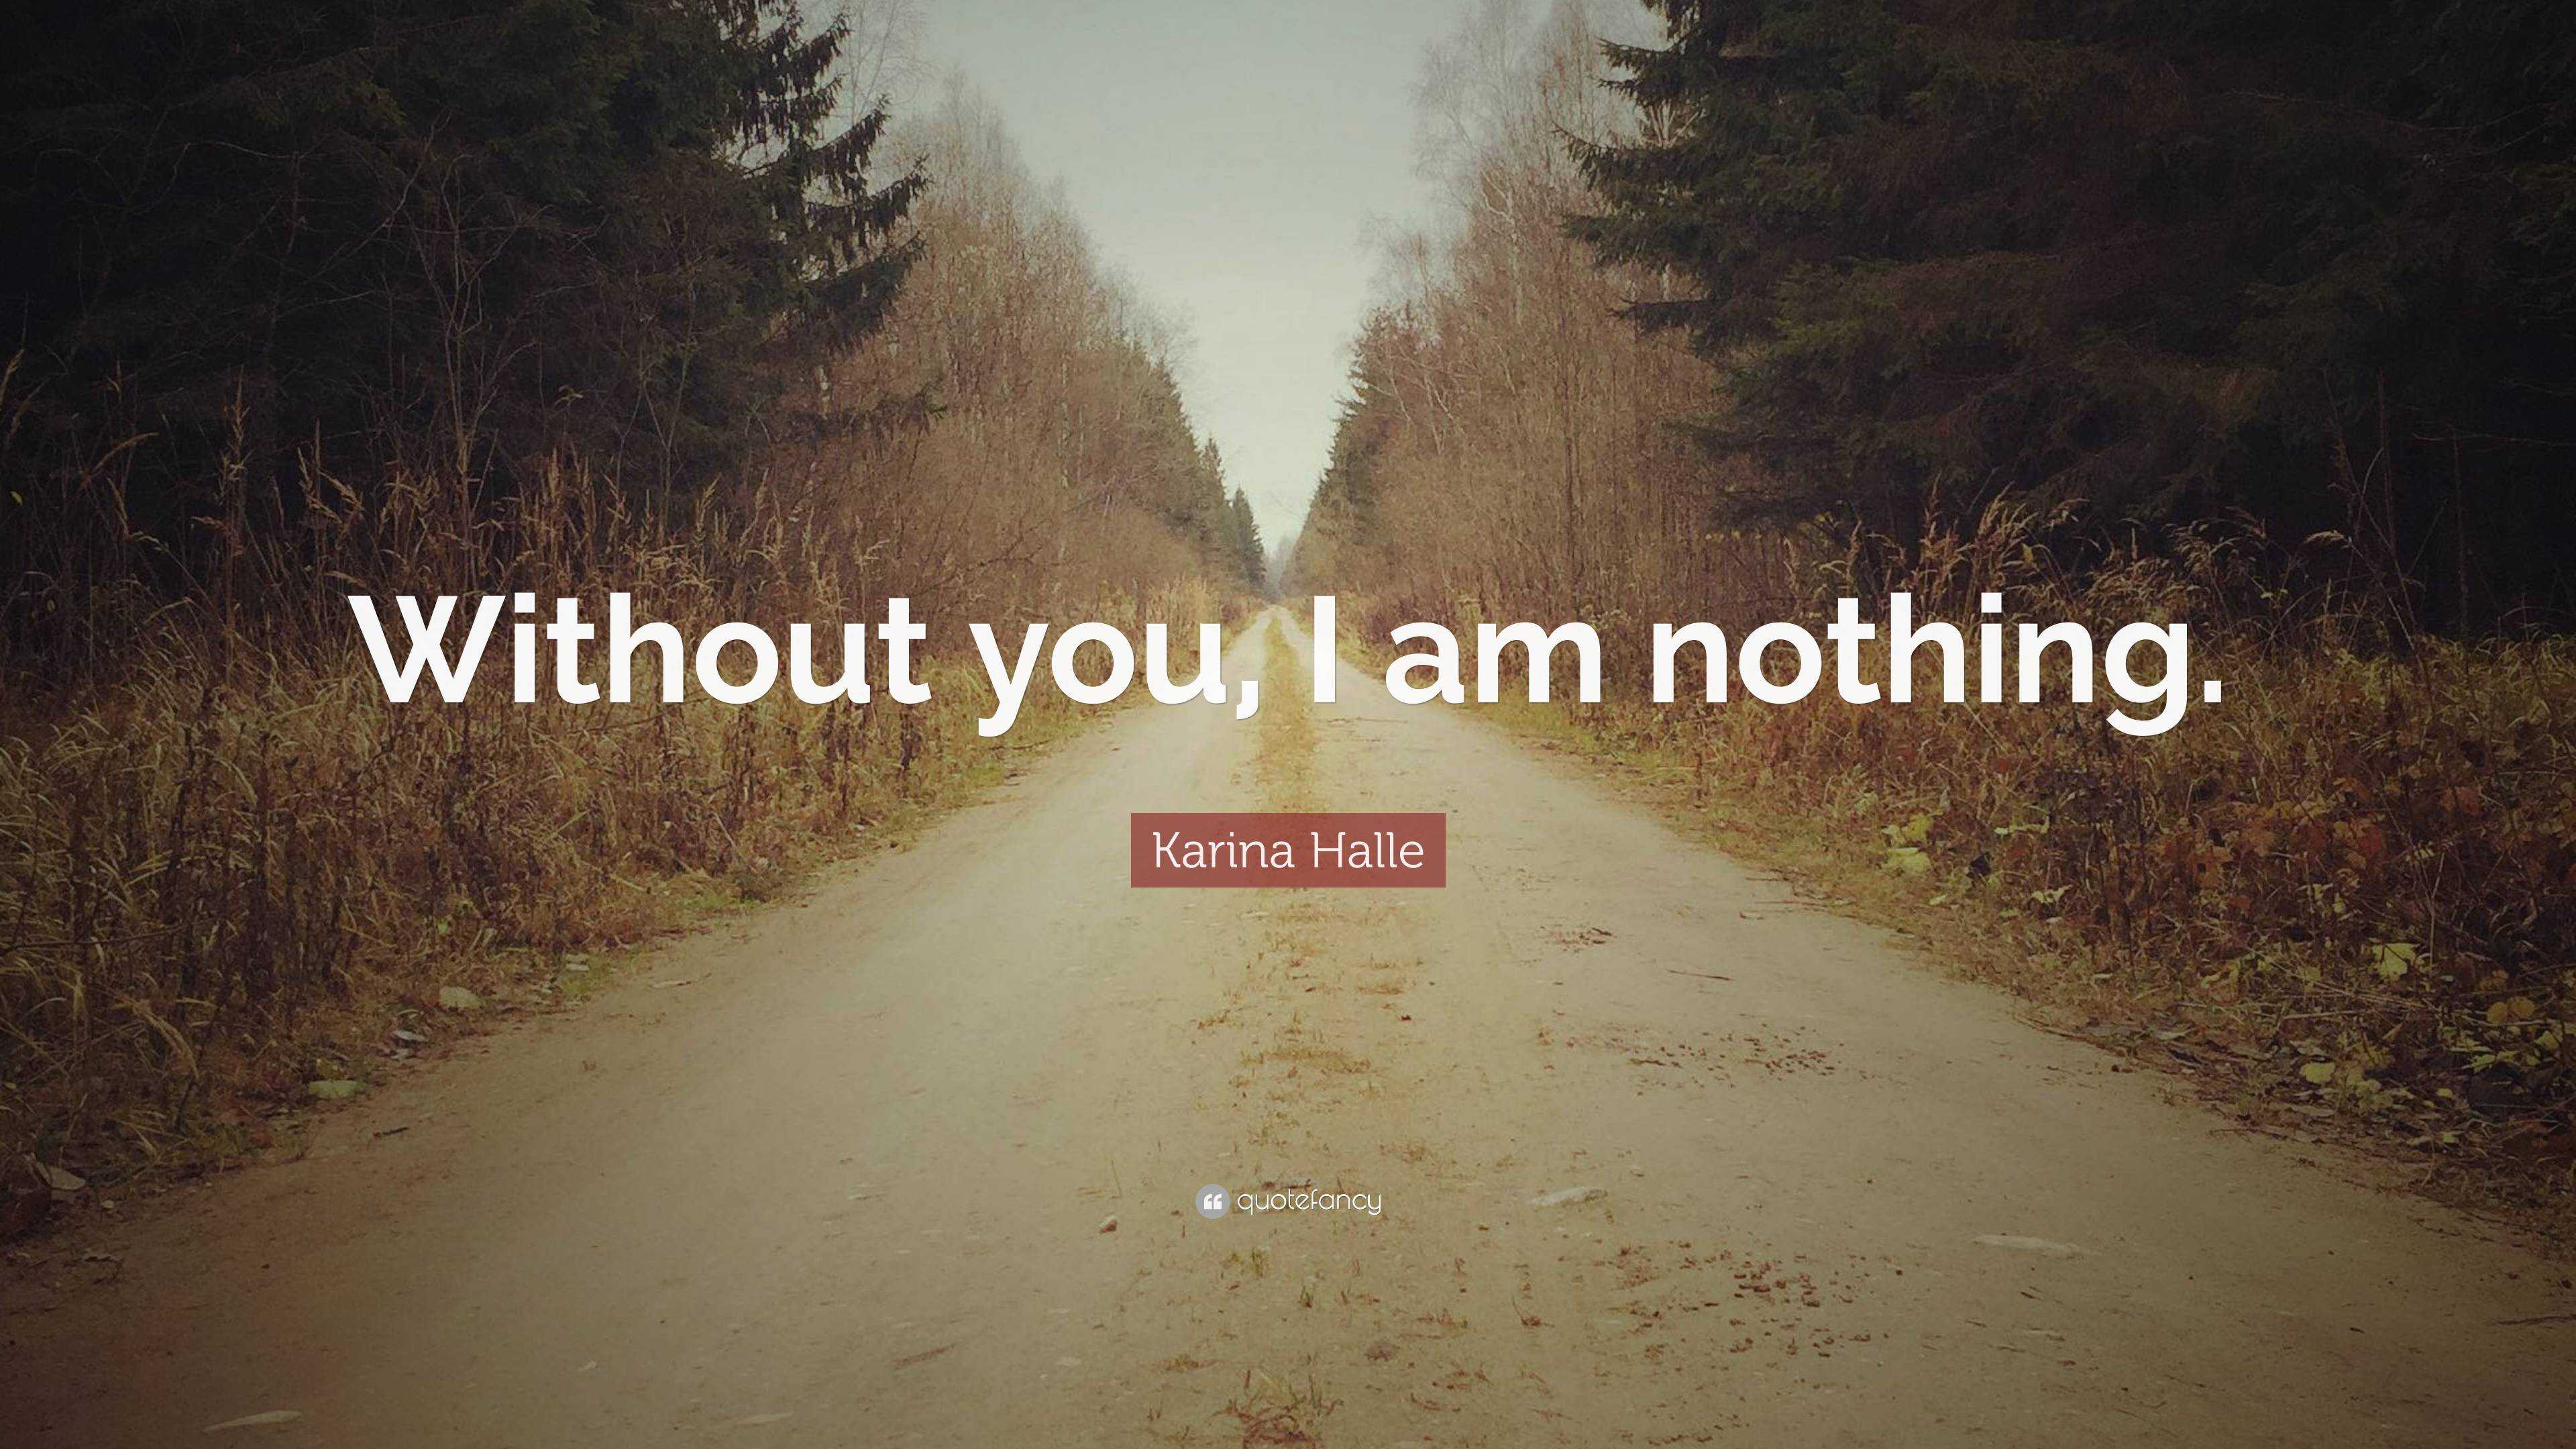 Karina Halle Quote: “Without you, I am nothing.”